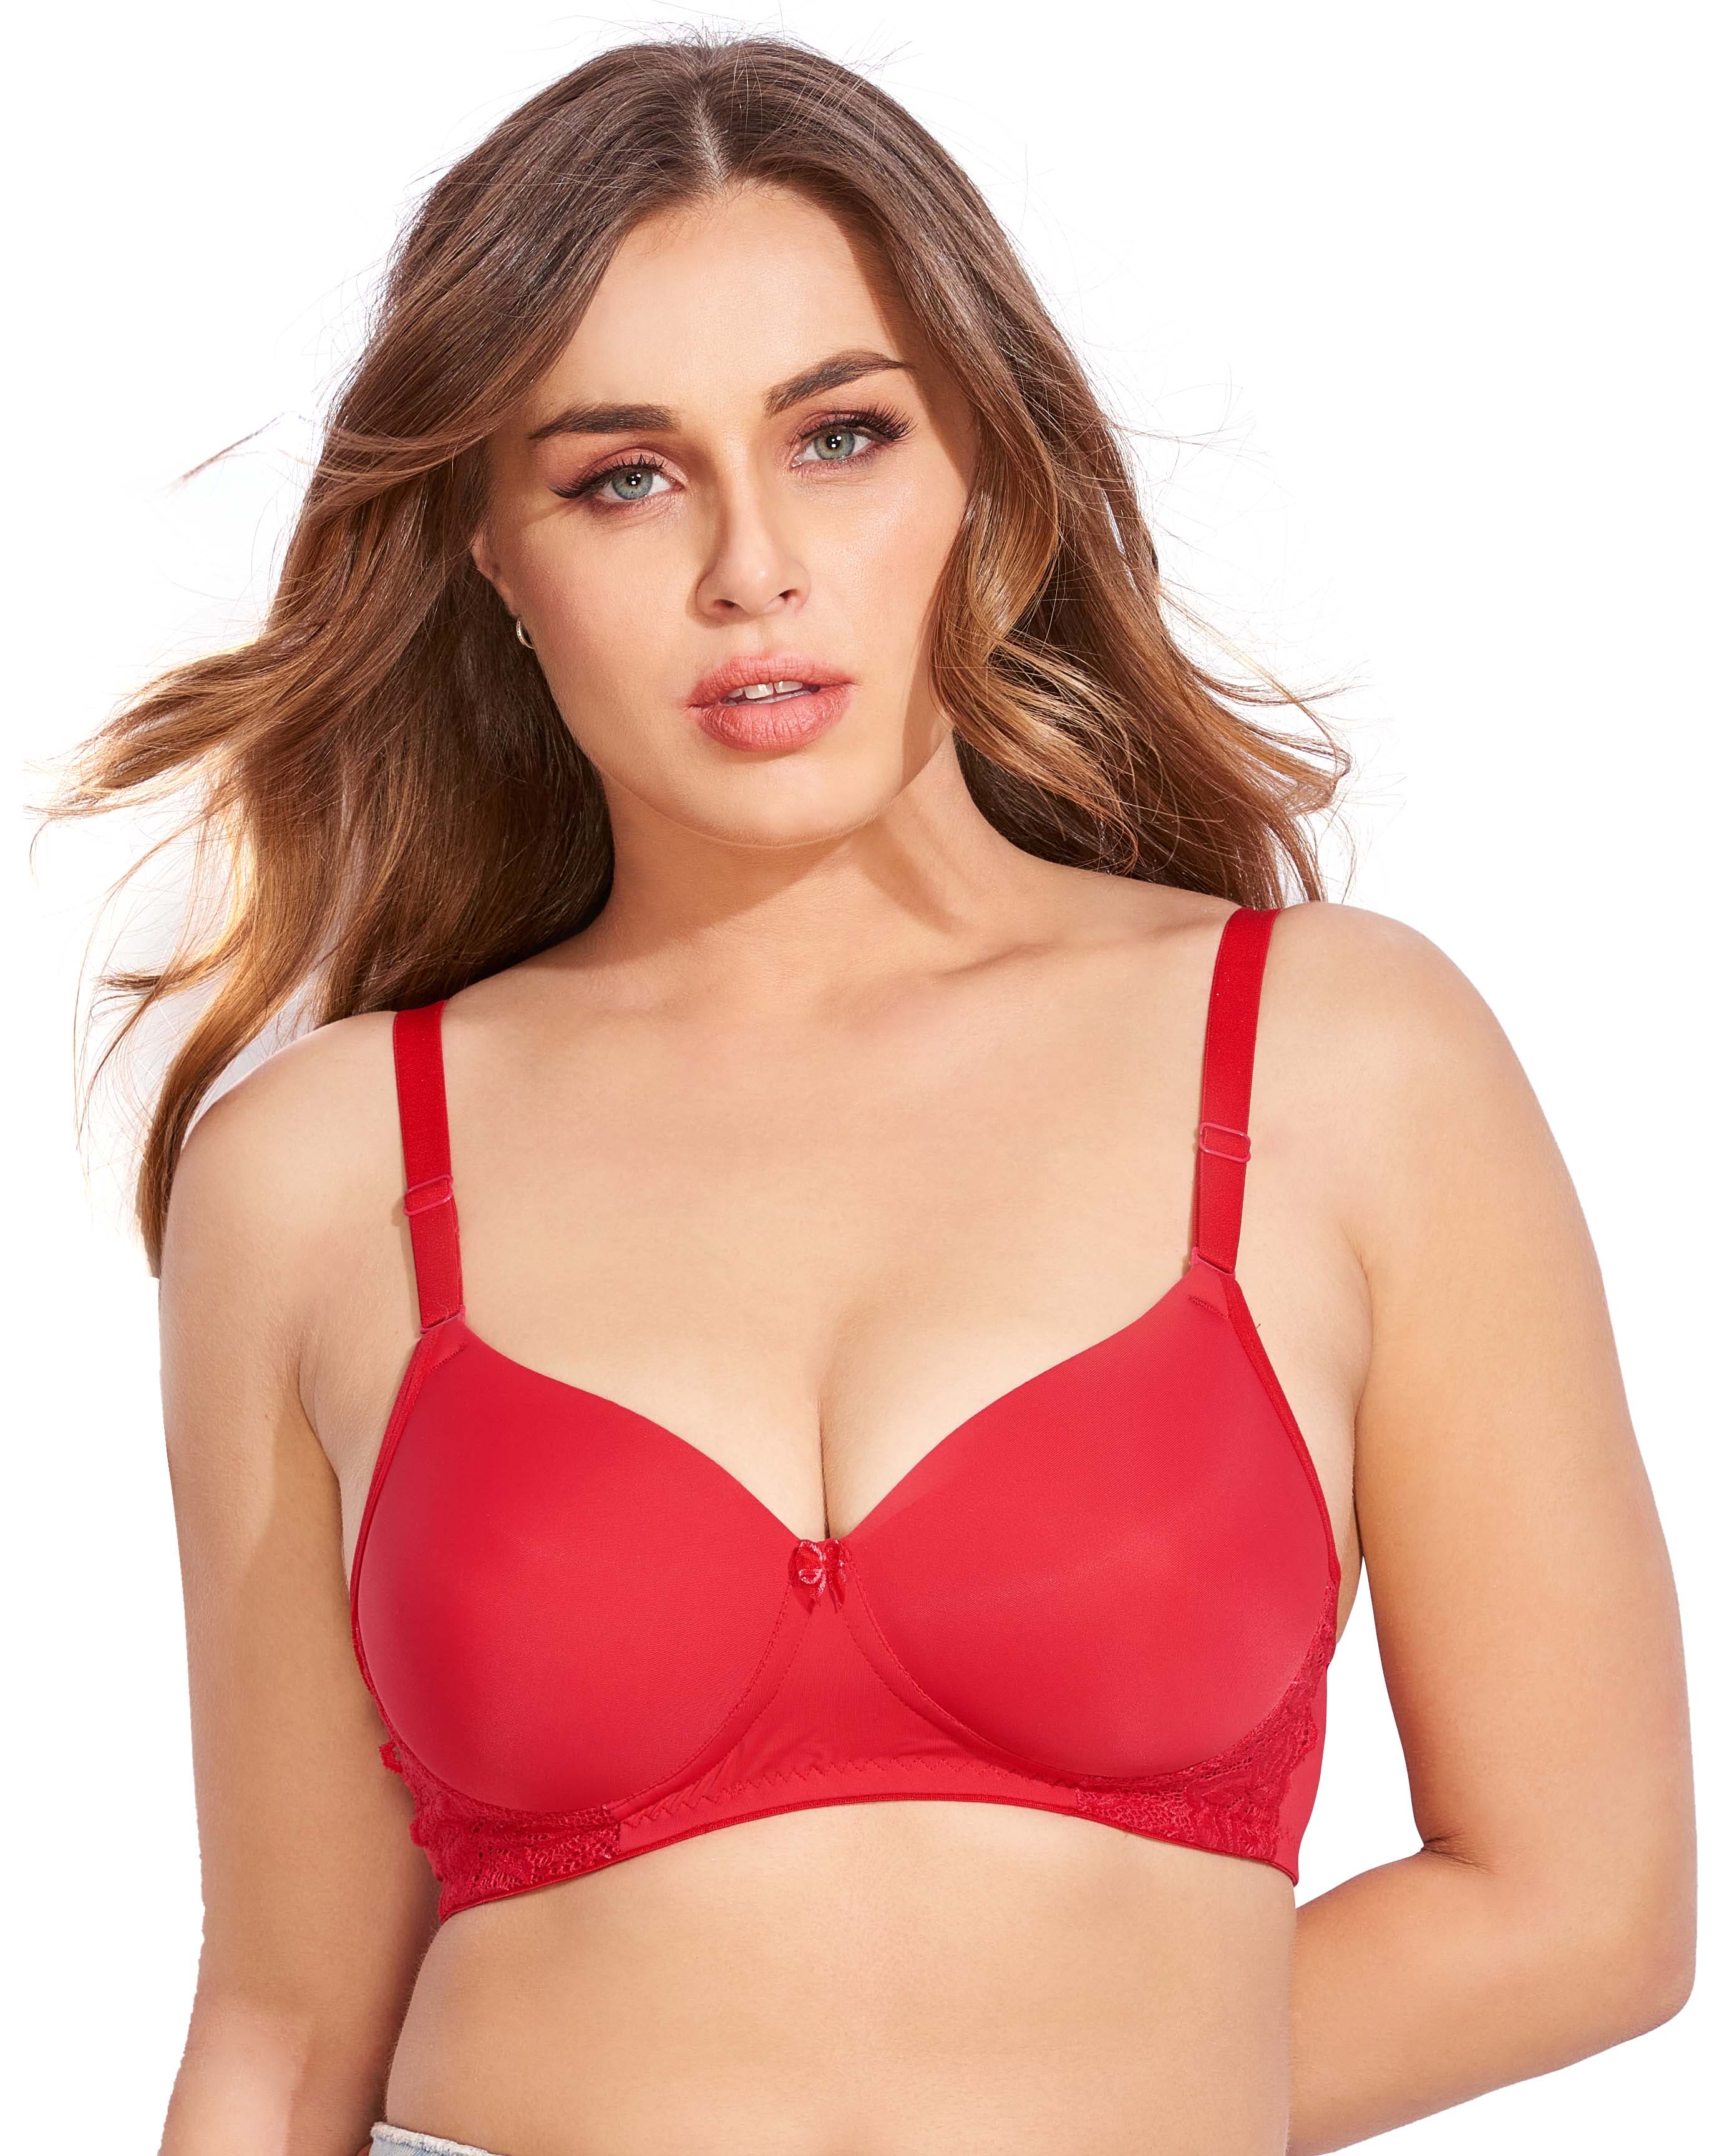 LacyLuxe Seamless Padded Bra: Full Coverage, Ultimate Comfort! – Eves Beauty